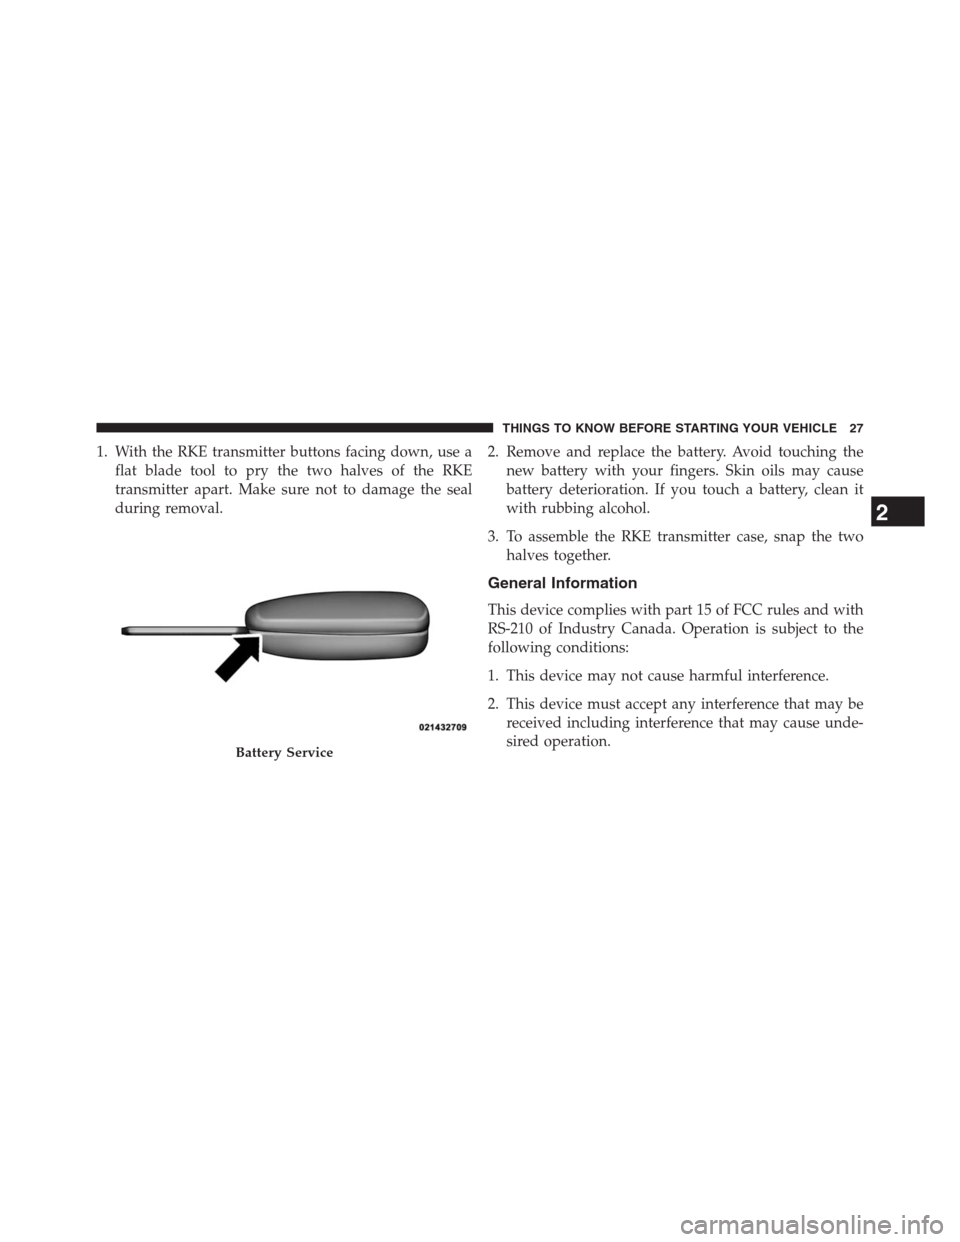 CHRYSLER 200 CONVERTIBLE 2013 1.G Owners Manual 1. With the RKE transmitter buttons facing down, use a
flat blade tool to pry the two halves of the RKE
transmitter apart. Make sure not to damage the seal
during removal.2. Remove and replace the bat